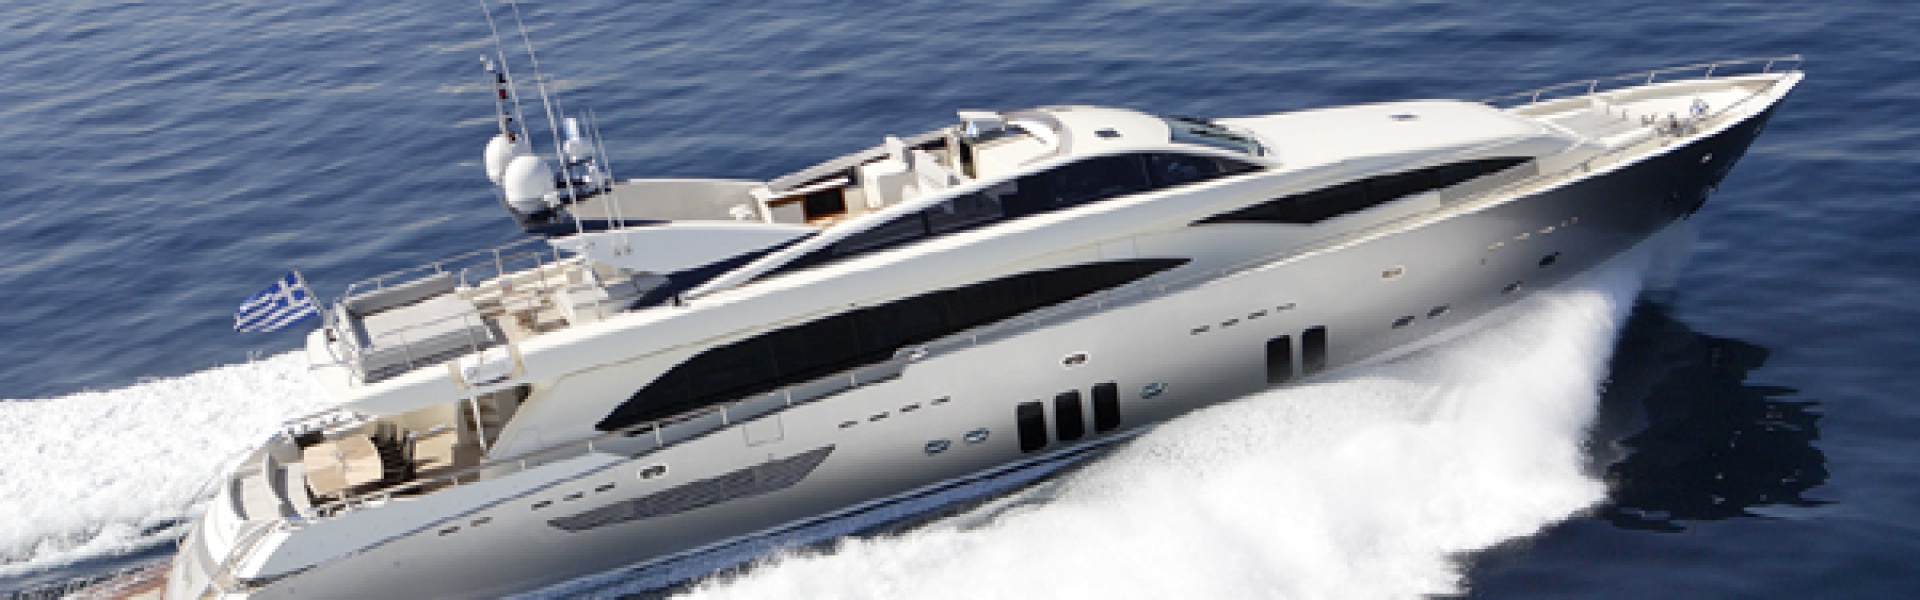 Yacht charter Guy Couach 37M